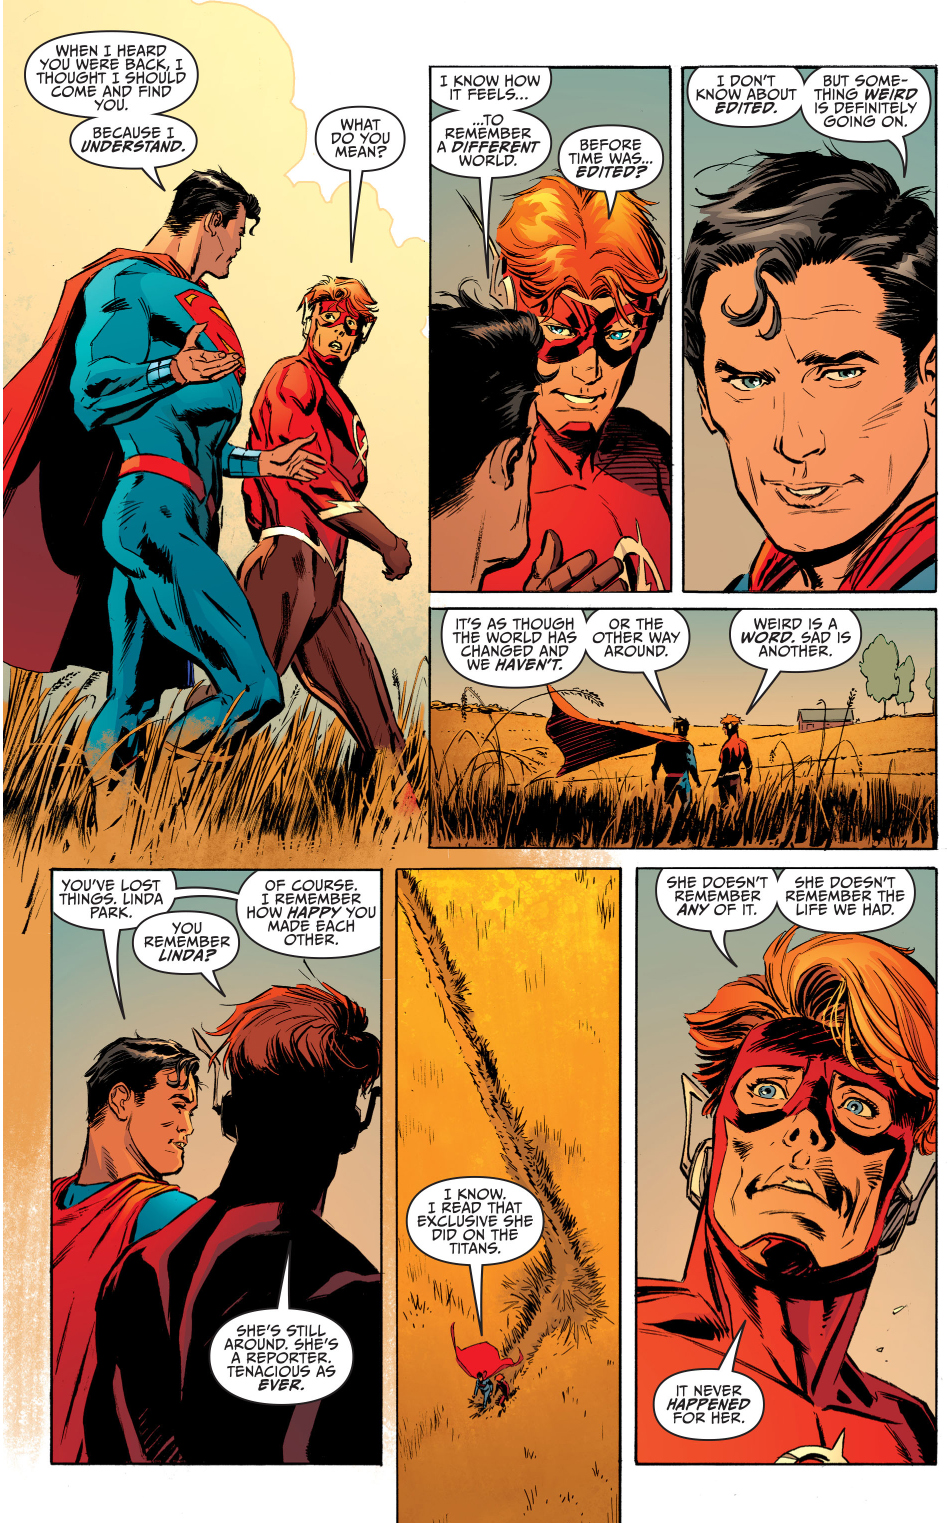 Superman (New Earth) Remembers Wally West (New Earth)